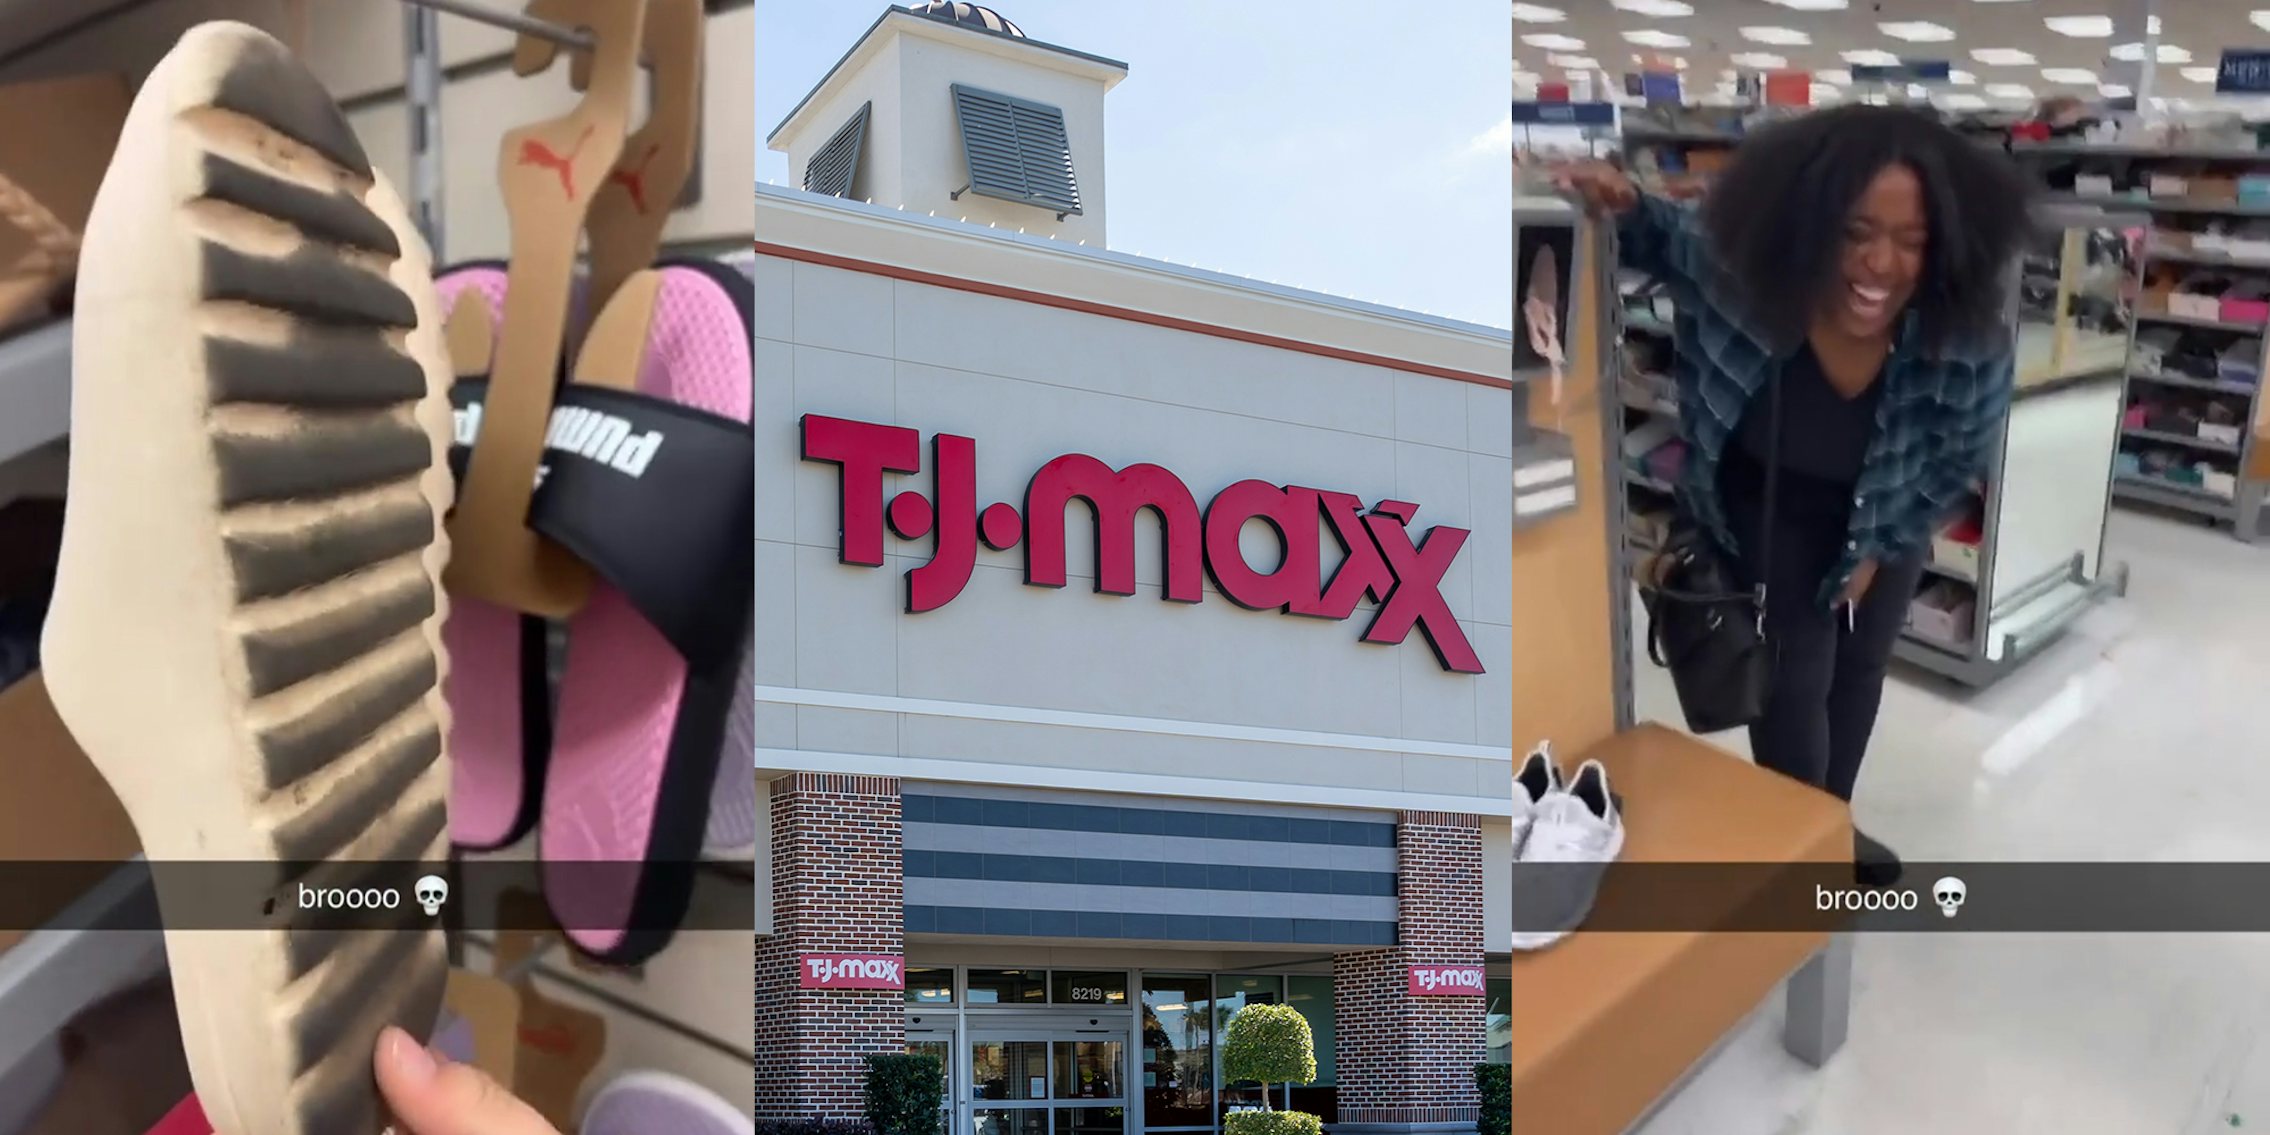 TJ Maxx Customer Swaps Out Their Used Shoes for New Pair